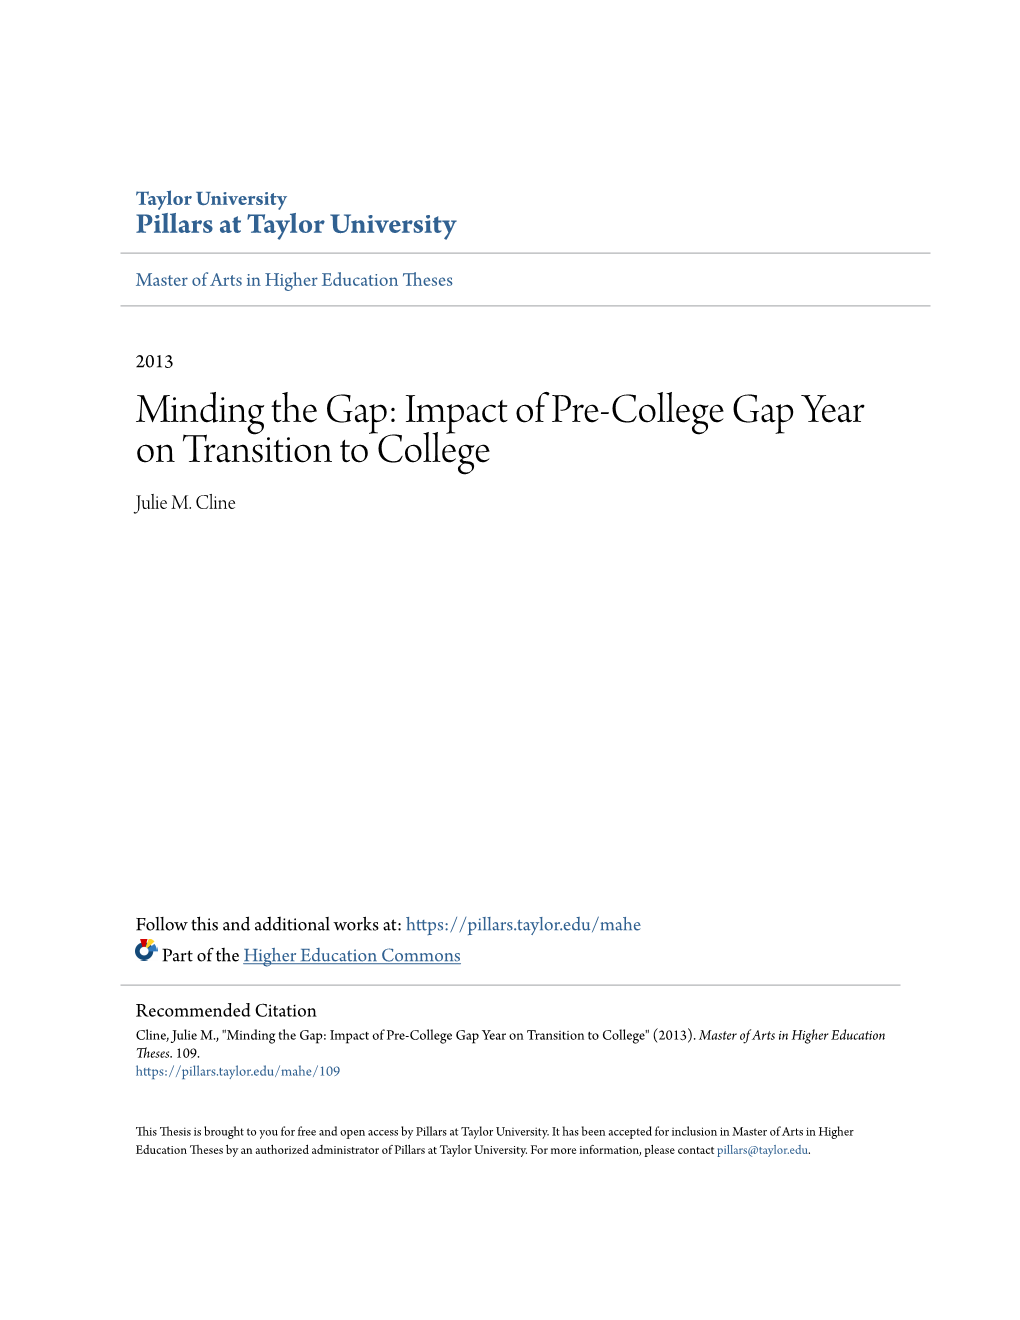 Impact of Pre-College Gap Year on Transition to College Julie M